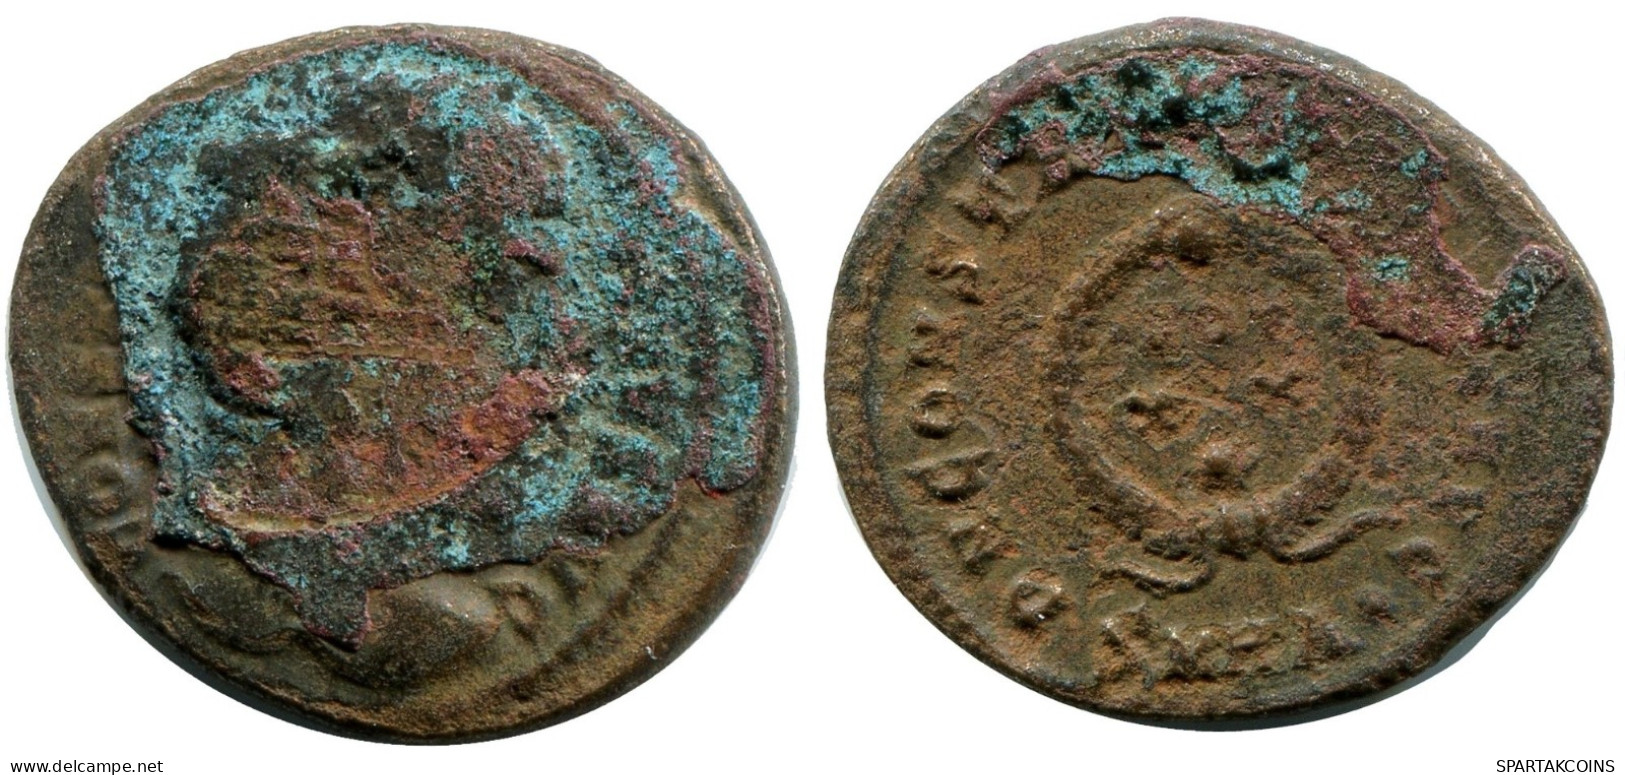 CONSTANTINE I MINTED IN HERACLEA FROM THE ROYAL ONTARIO MUSEUM #ANC11202.14.U.A - Der Christlischen Kaiser (307 / 363)